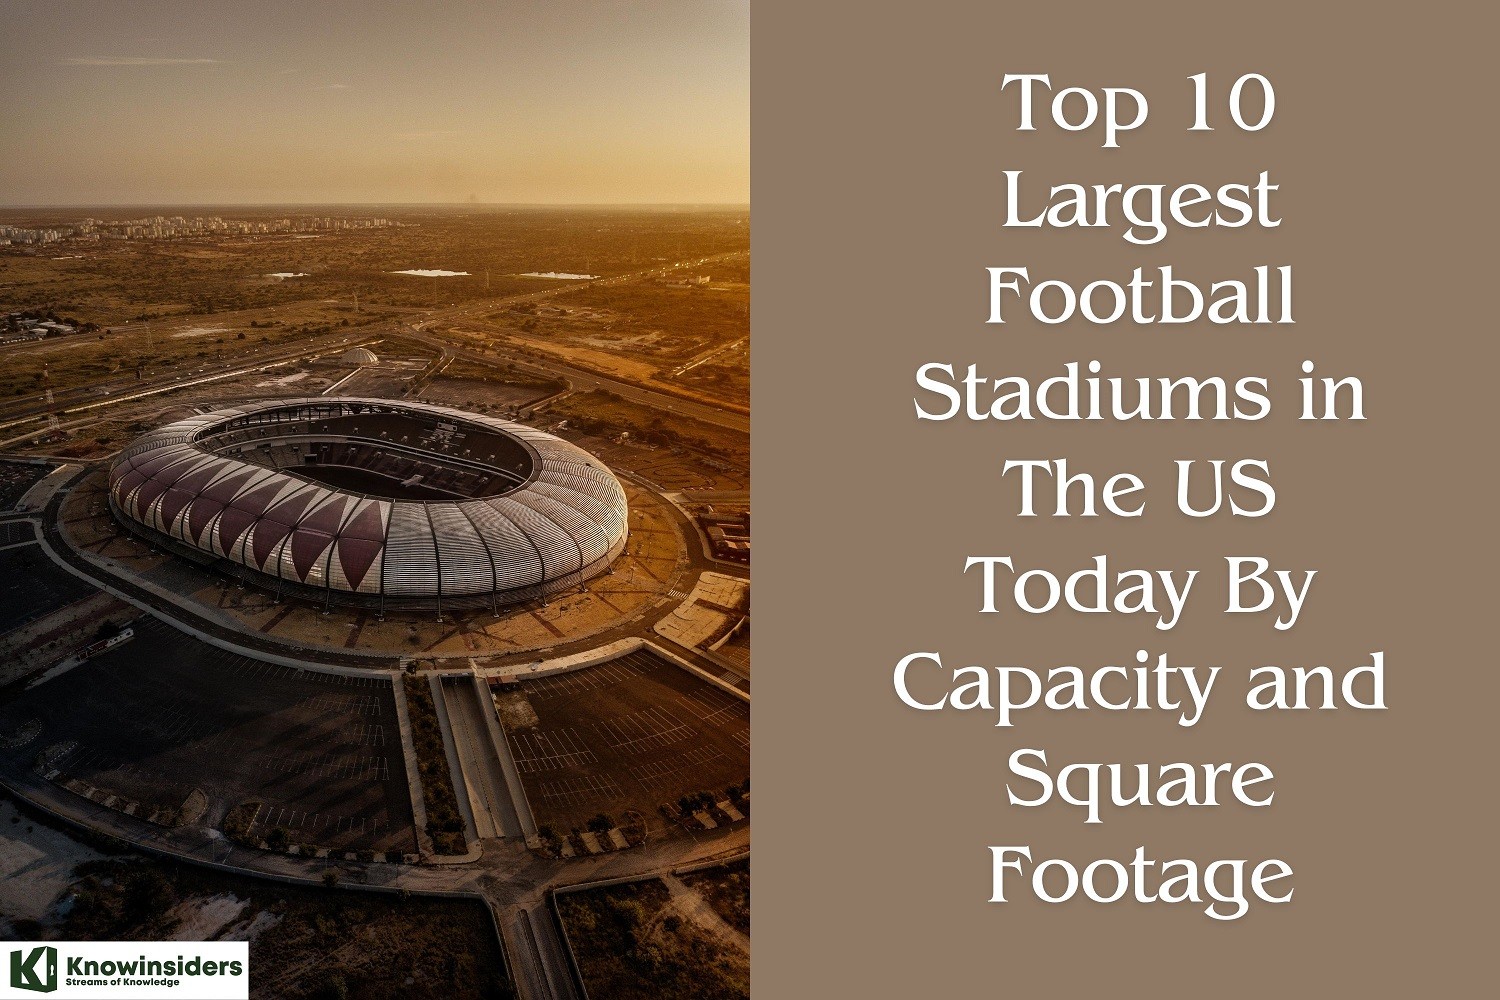 Top 10 Largest Football (NFL) Stadiums in the US By Capacity and Square Footage